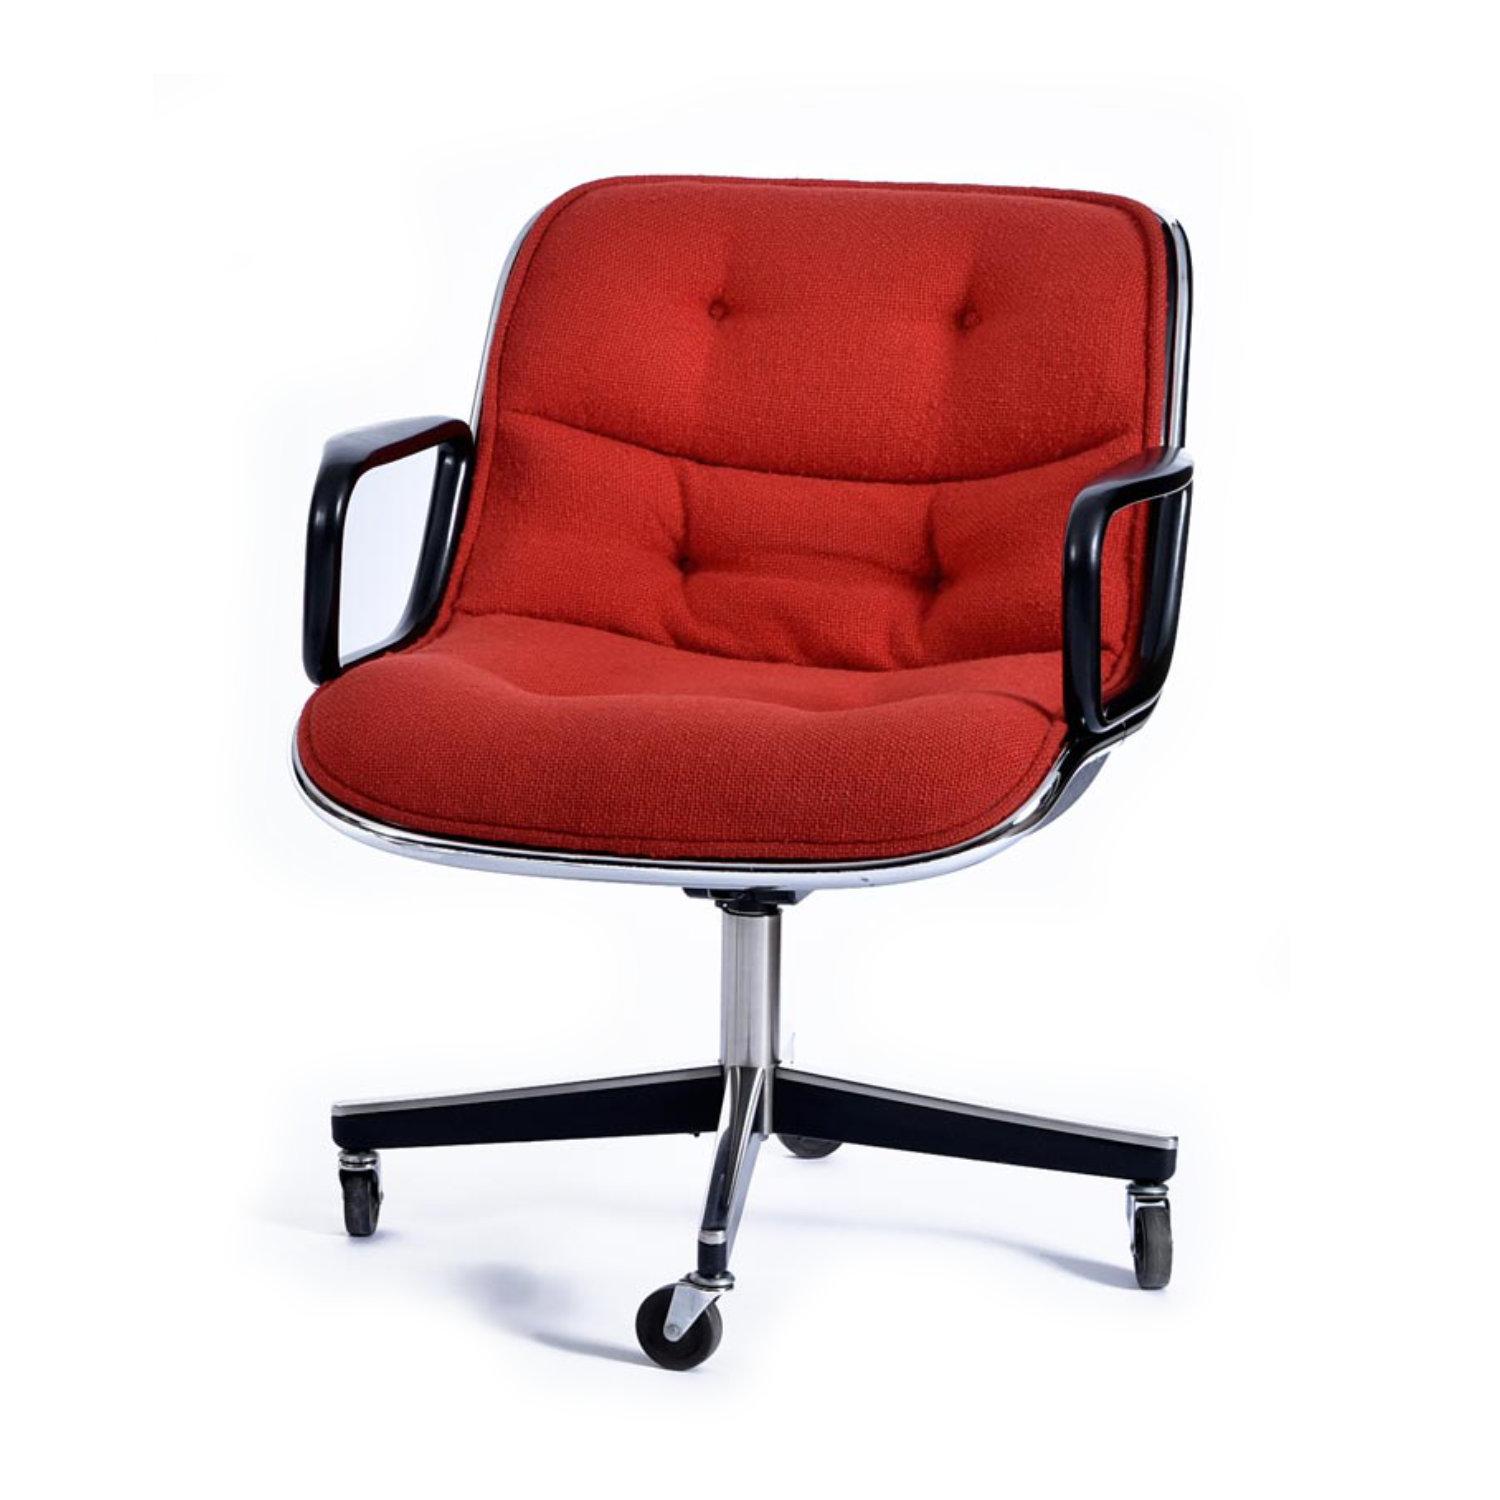 Original red tweed Charles Pollock for knoll executive chair. The original red fabric is in outstanding condition. Our restoration team has steam cleaned rendering the color is more bright and even. The chrome edge band and back shell have only very